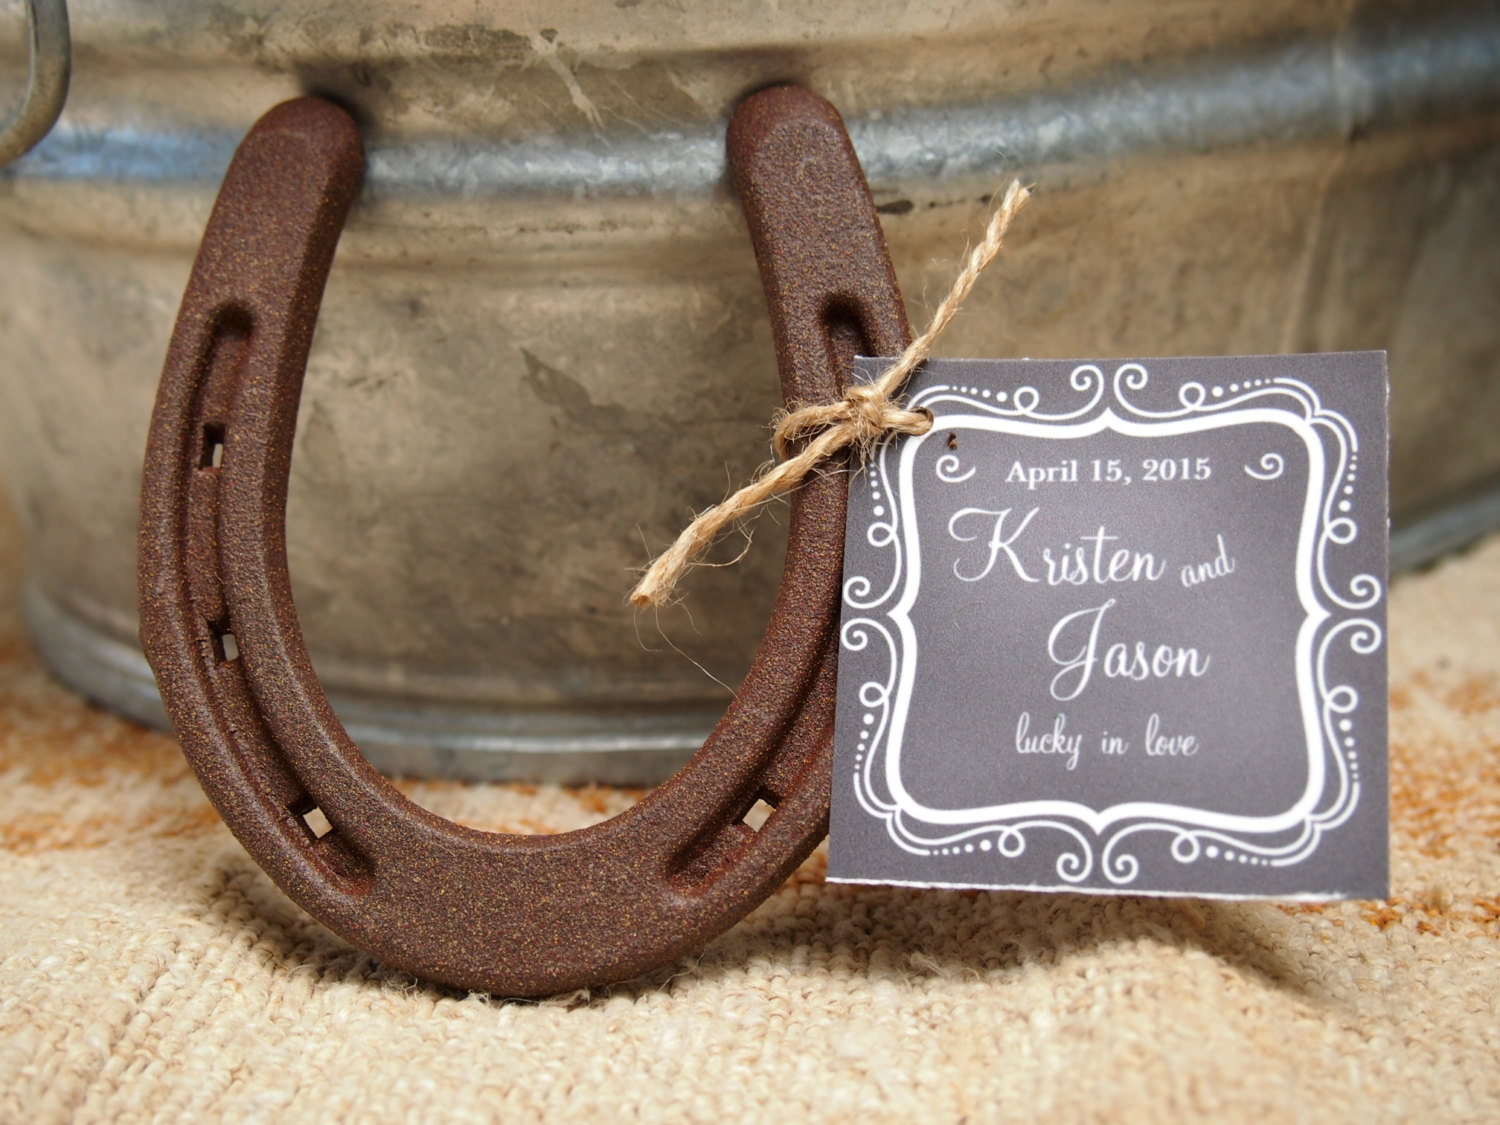 Horse shoes as wedding favors